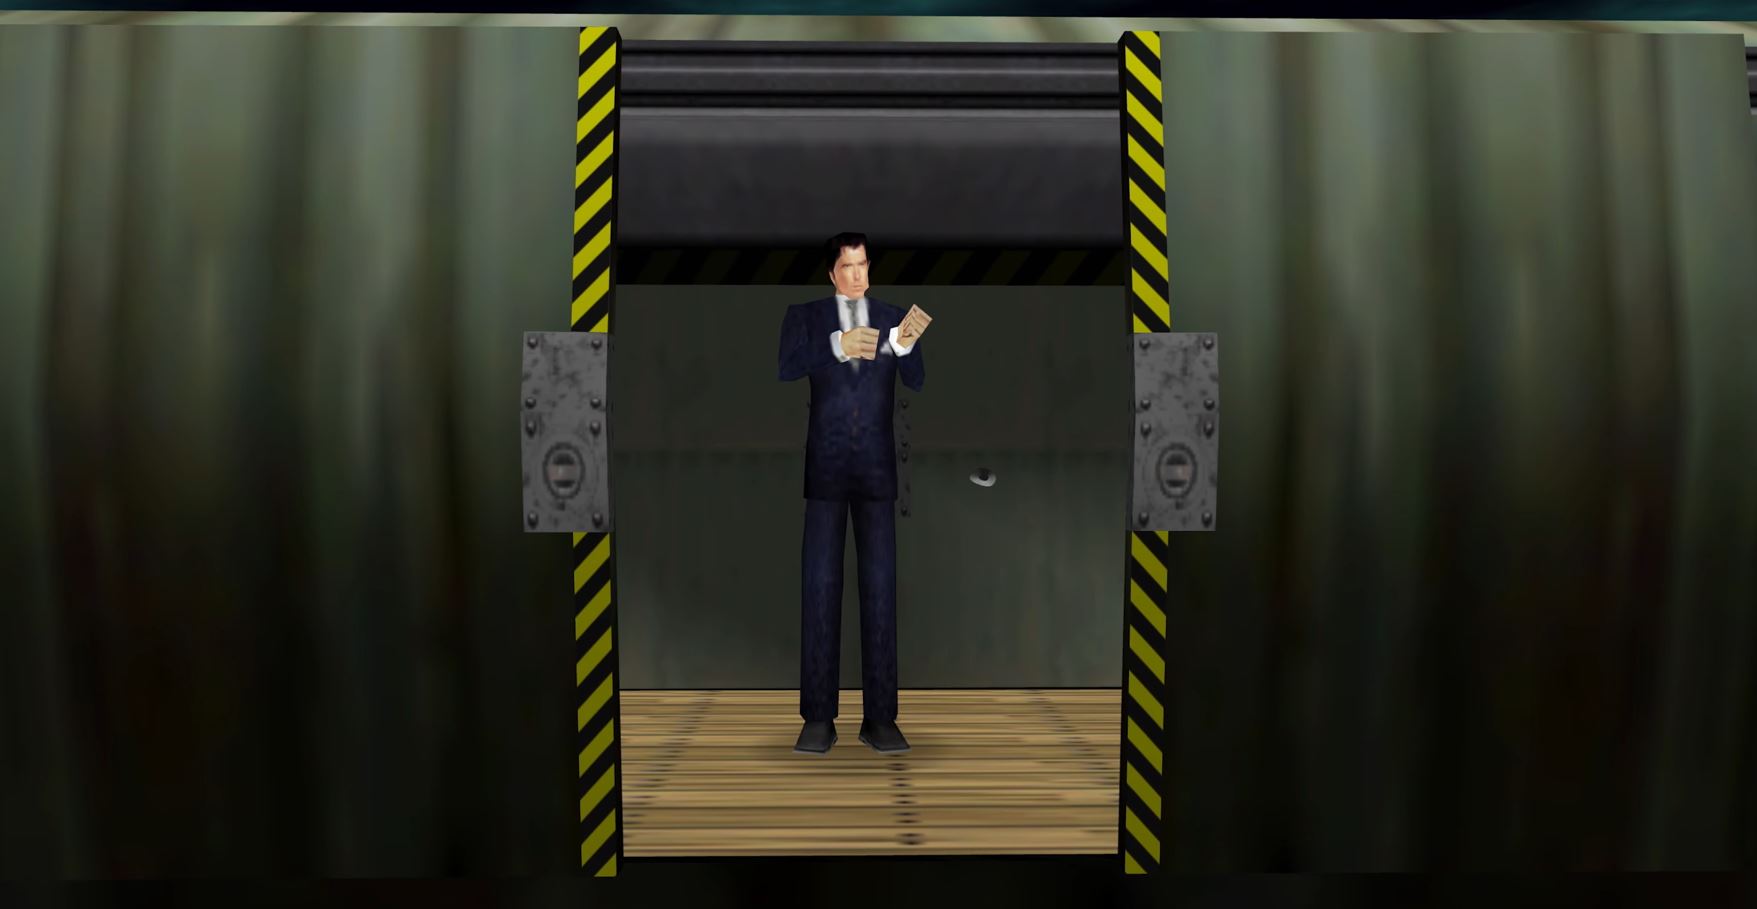 Goldeneye 007 comes to Game Pass, Nintendo Switch this week